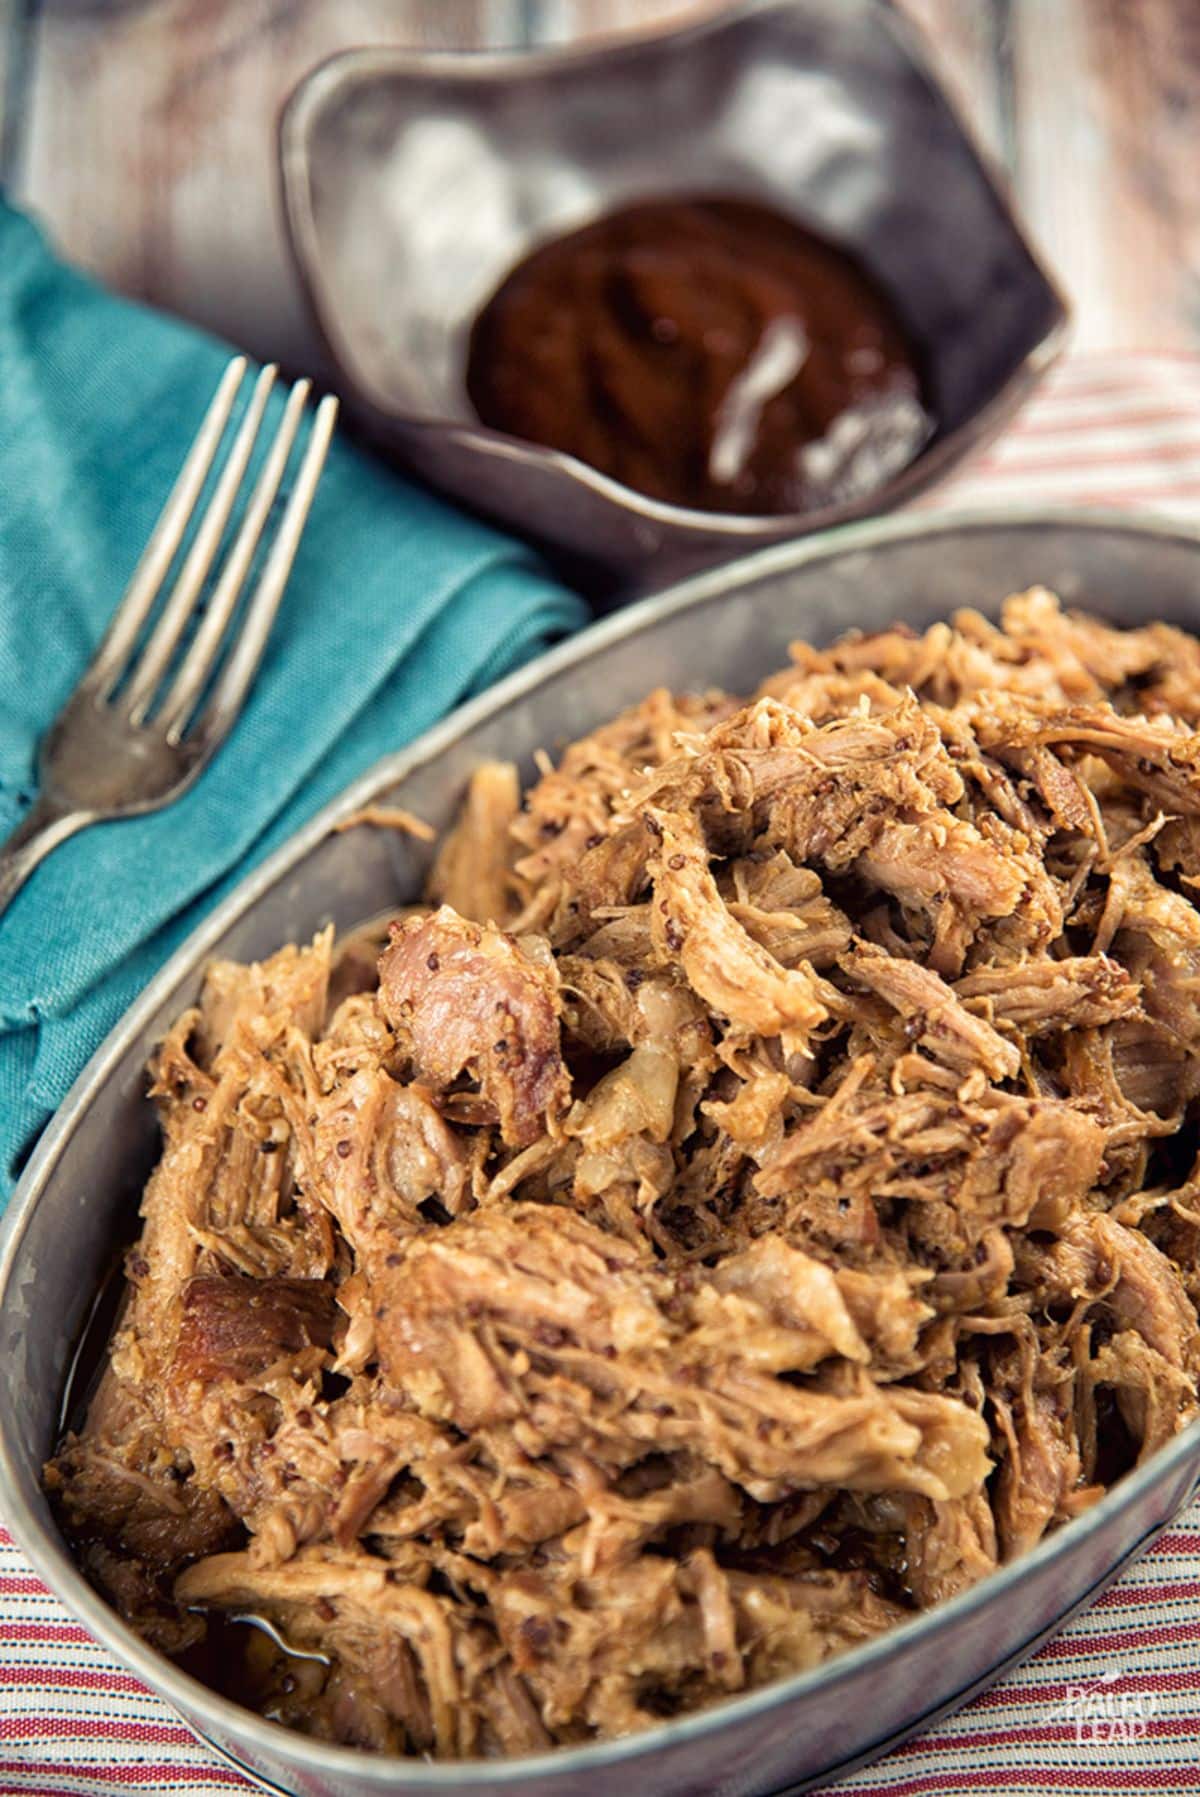 Pulled Pork With BBQ Mustard Sauce